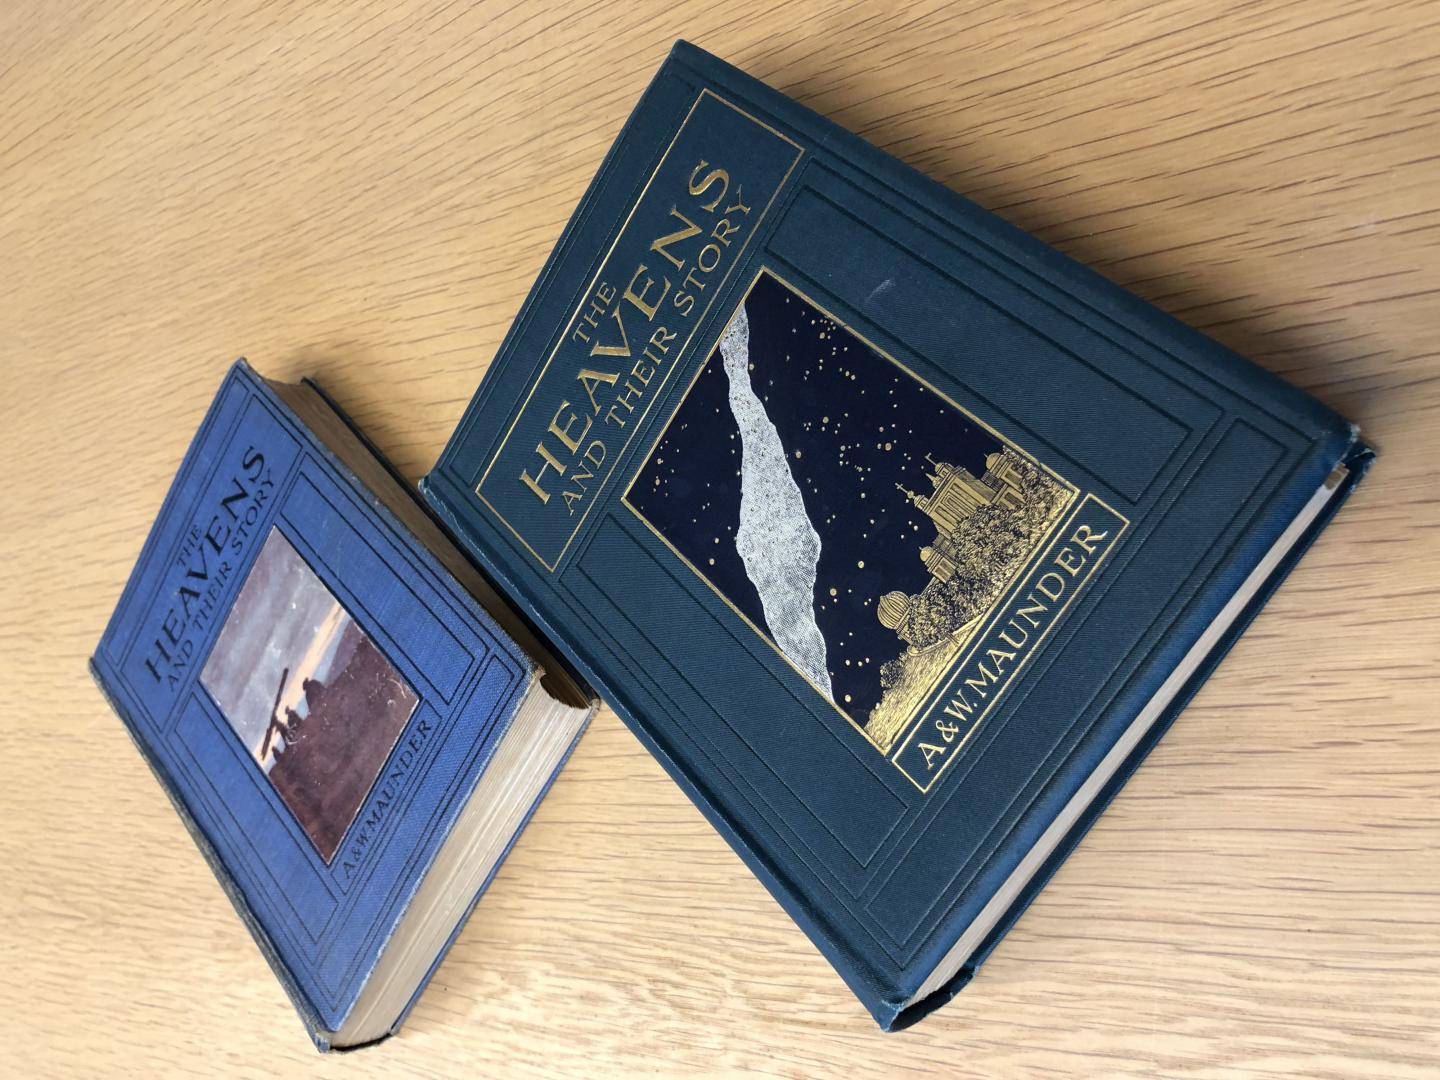 Both editions of “The Heavens and their Story” together in the Caird Library 